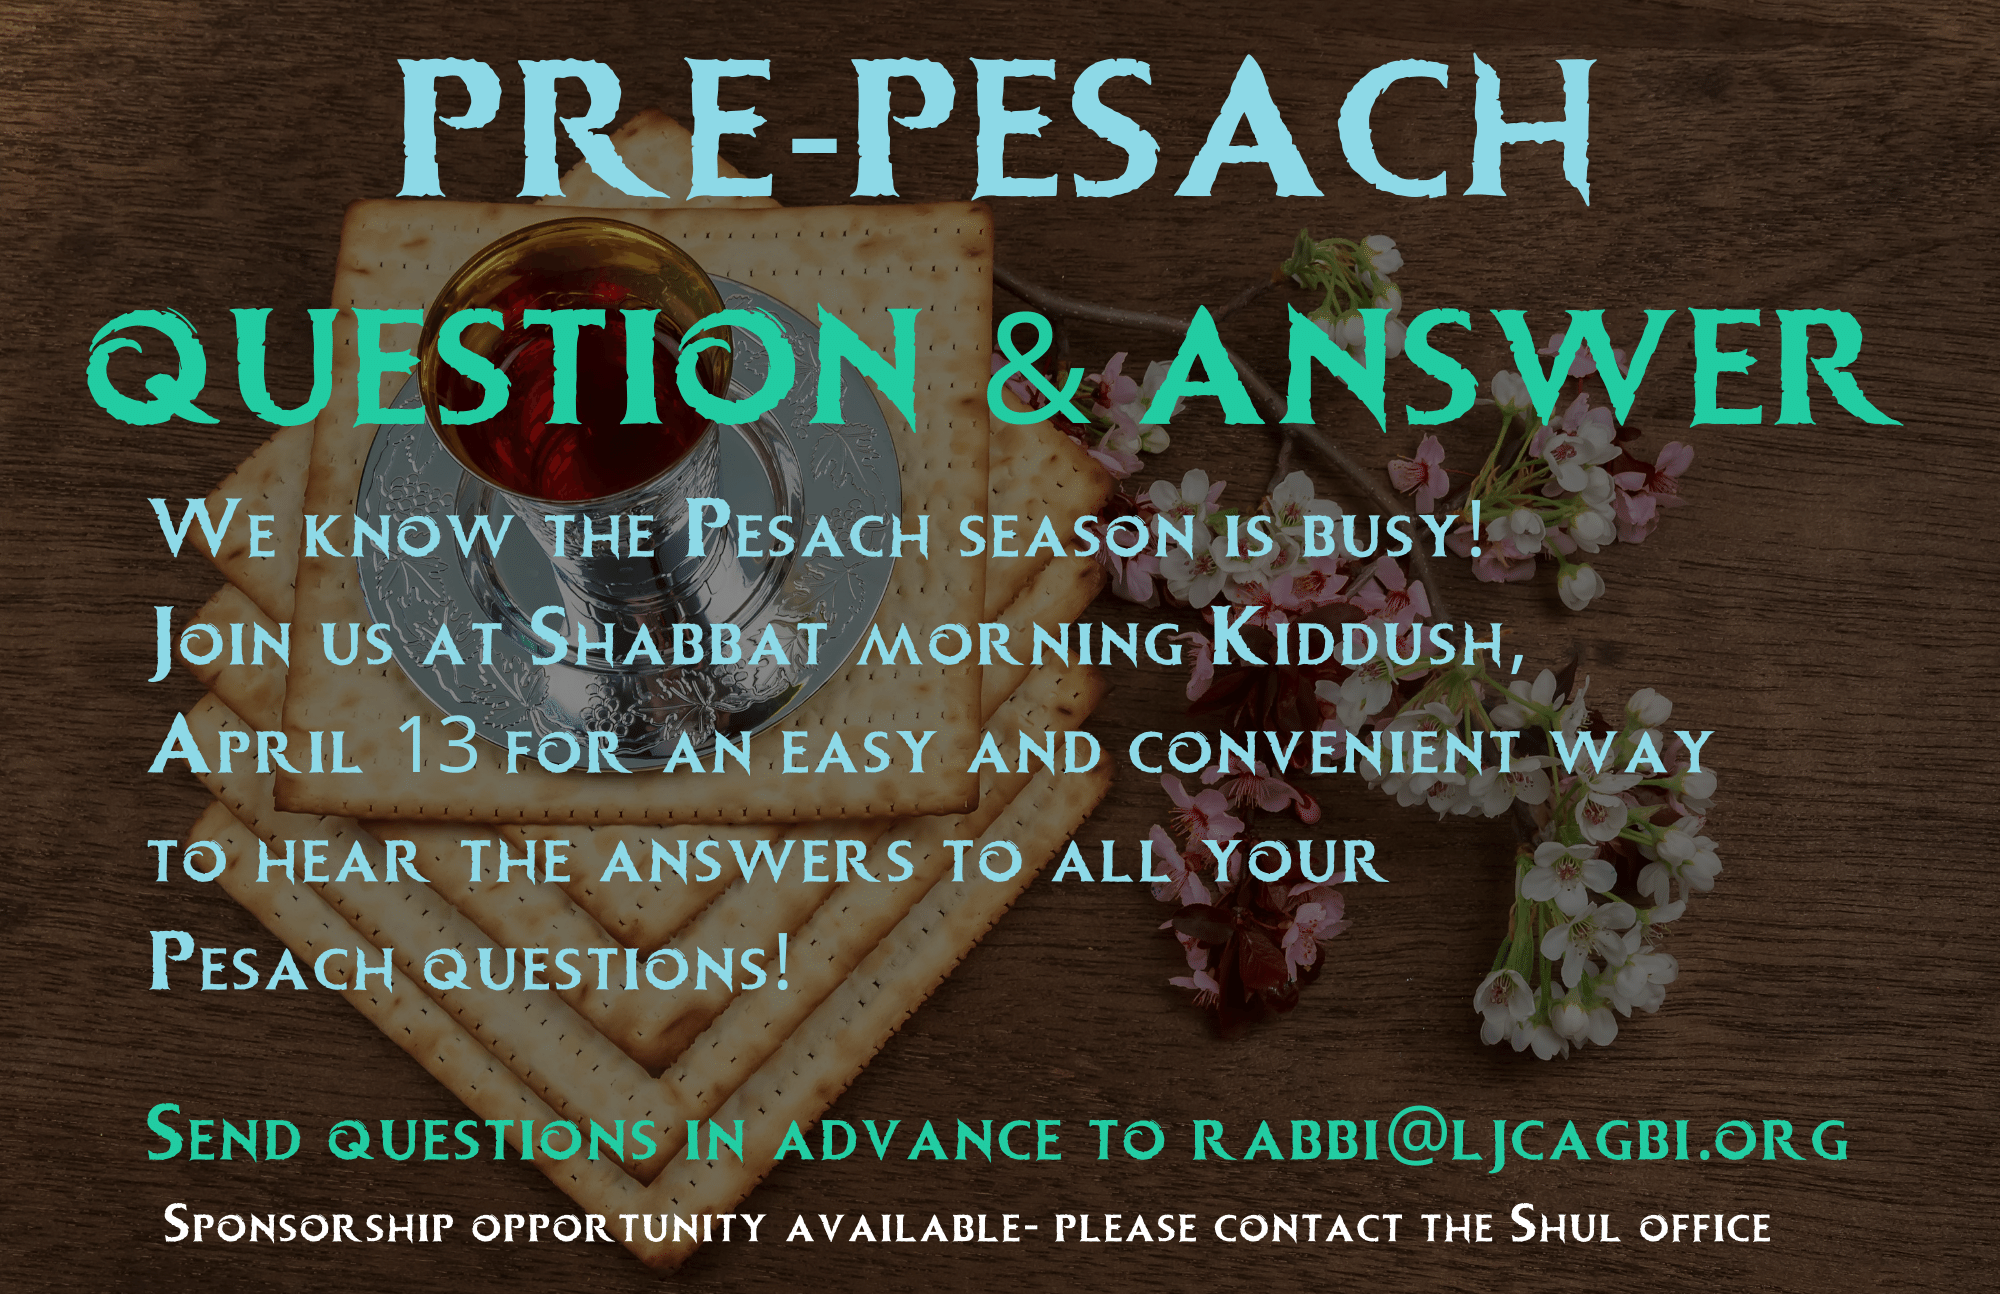 Pre-Pesach Questions & Answers